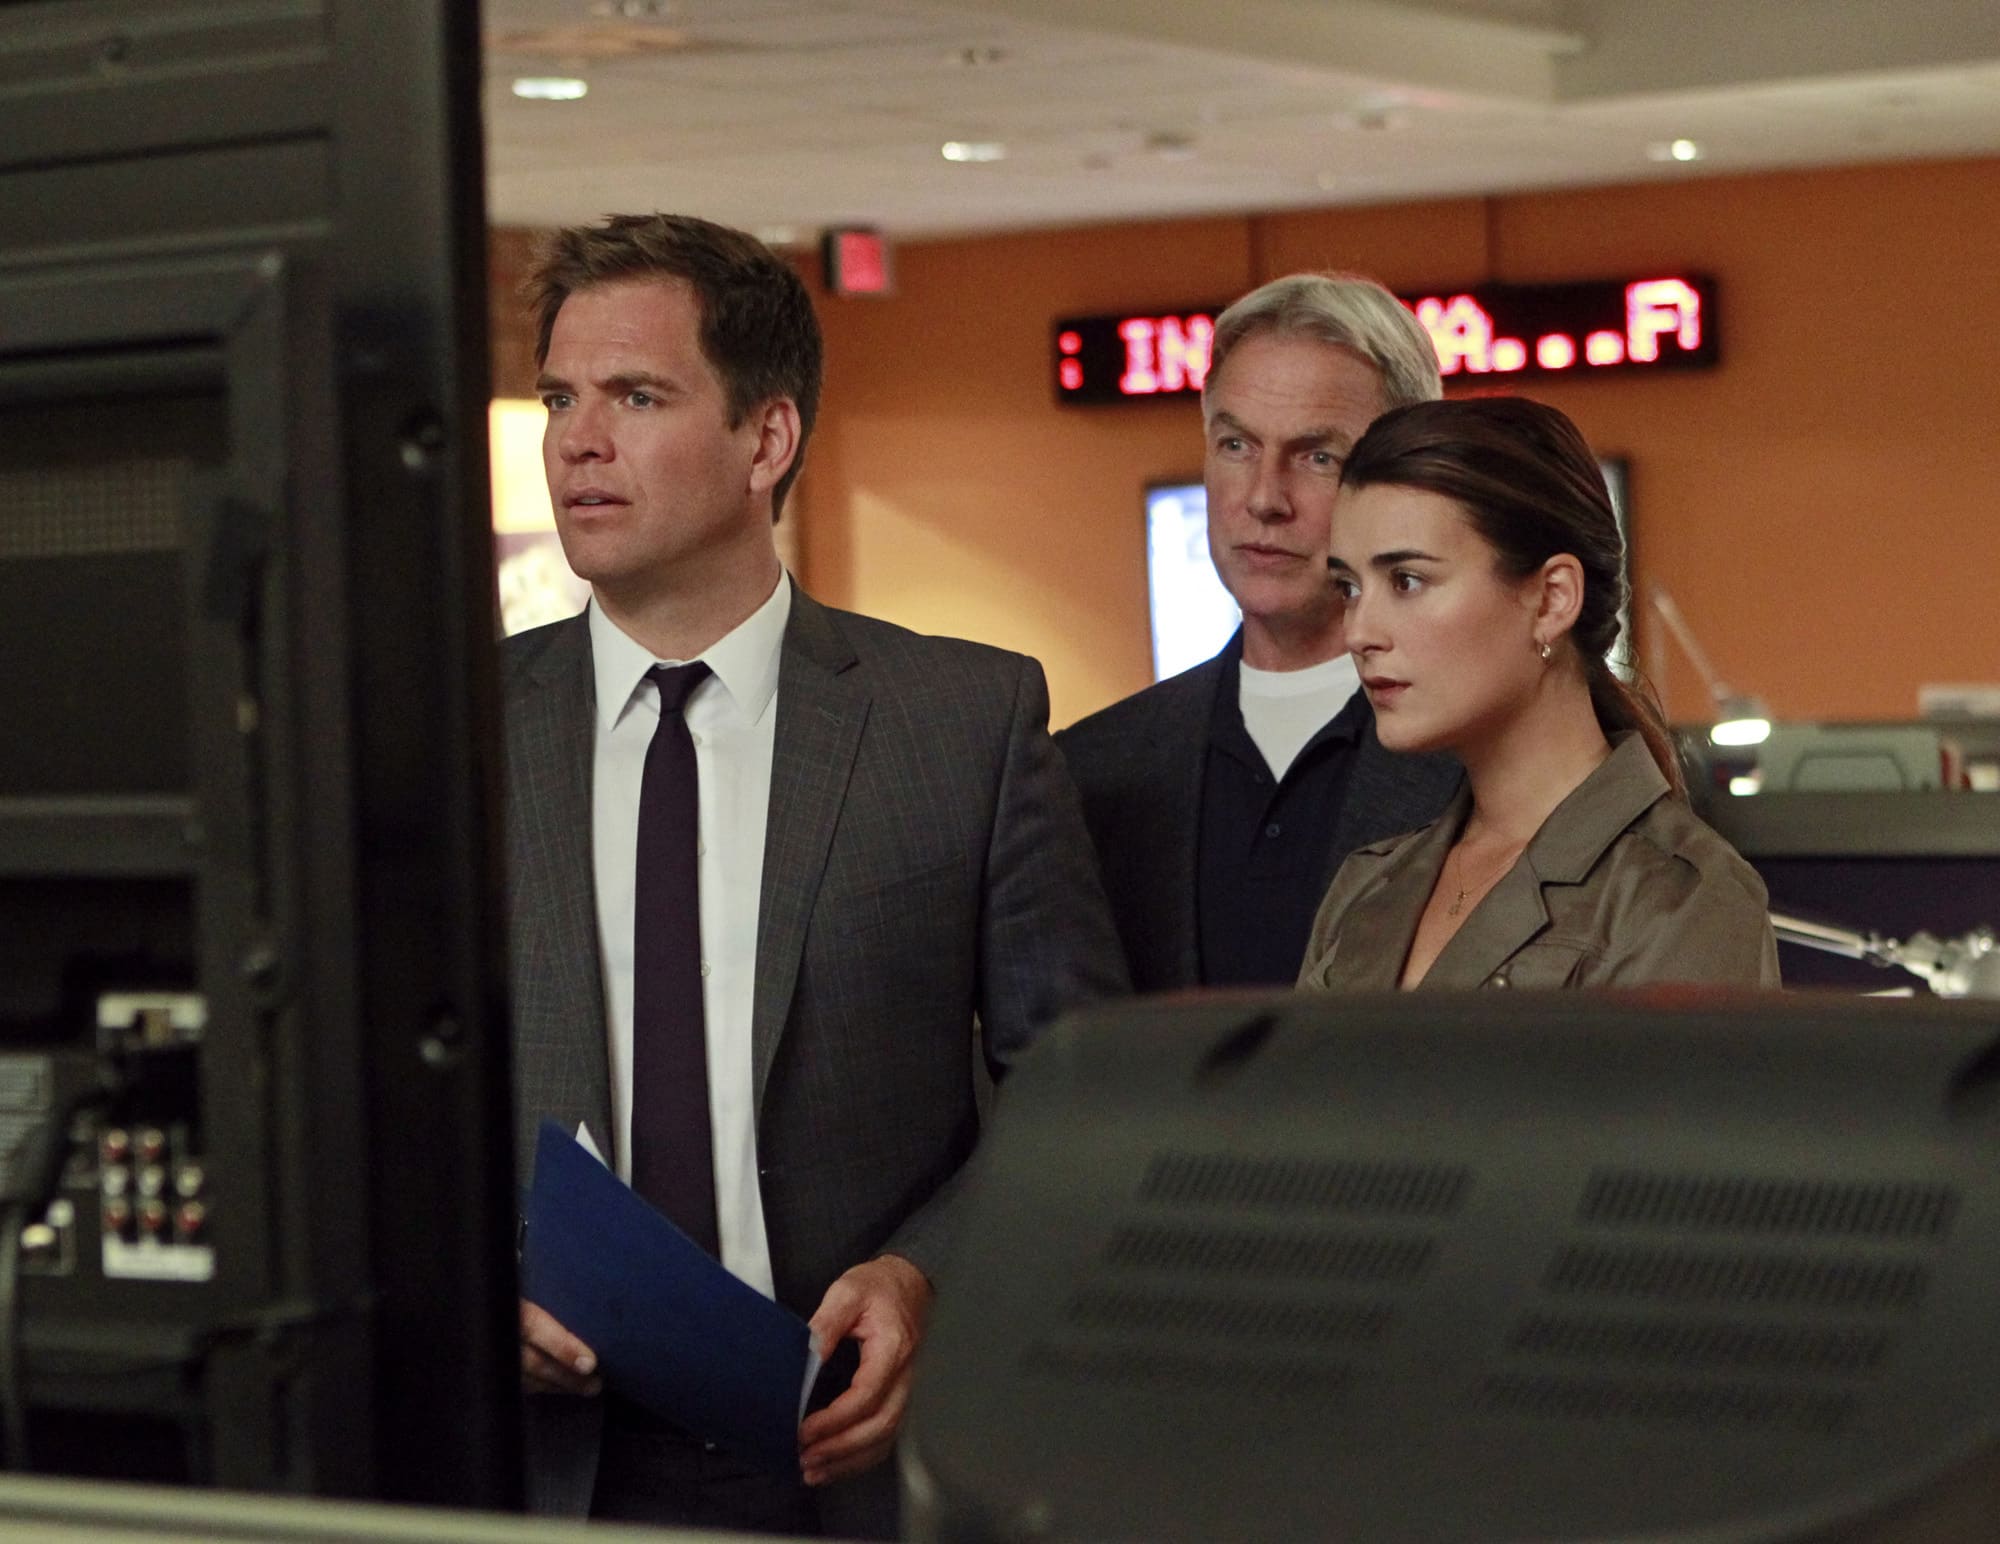 NCIS Photo: Monty Brinton/CBS 2011 CBS Broadcasting, Inc. All Rights Reserved